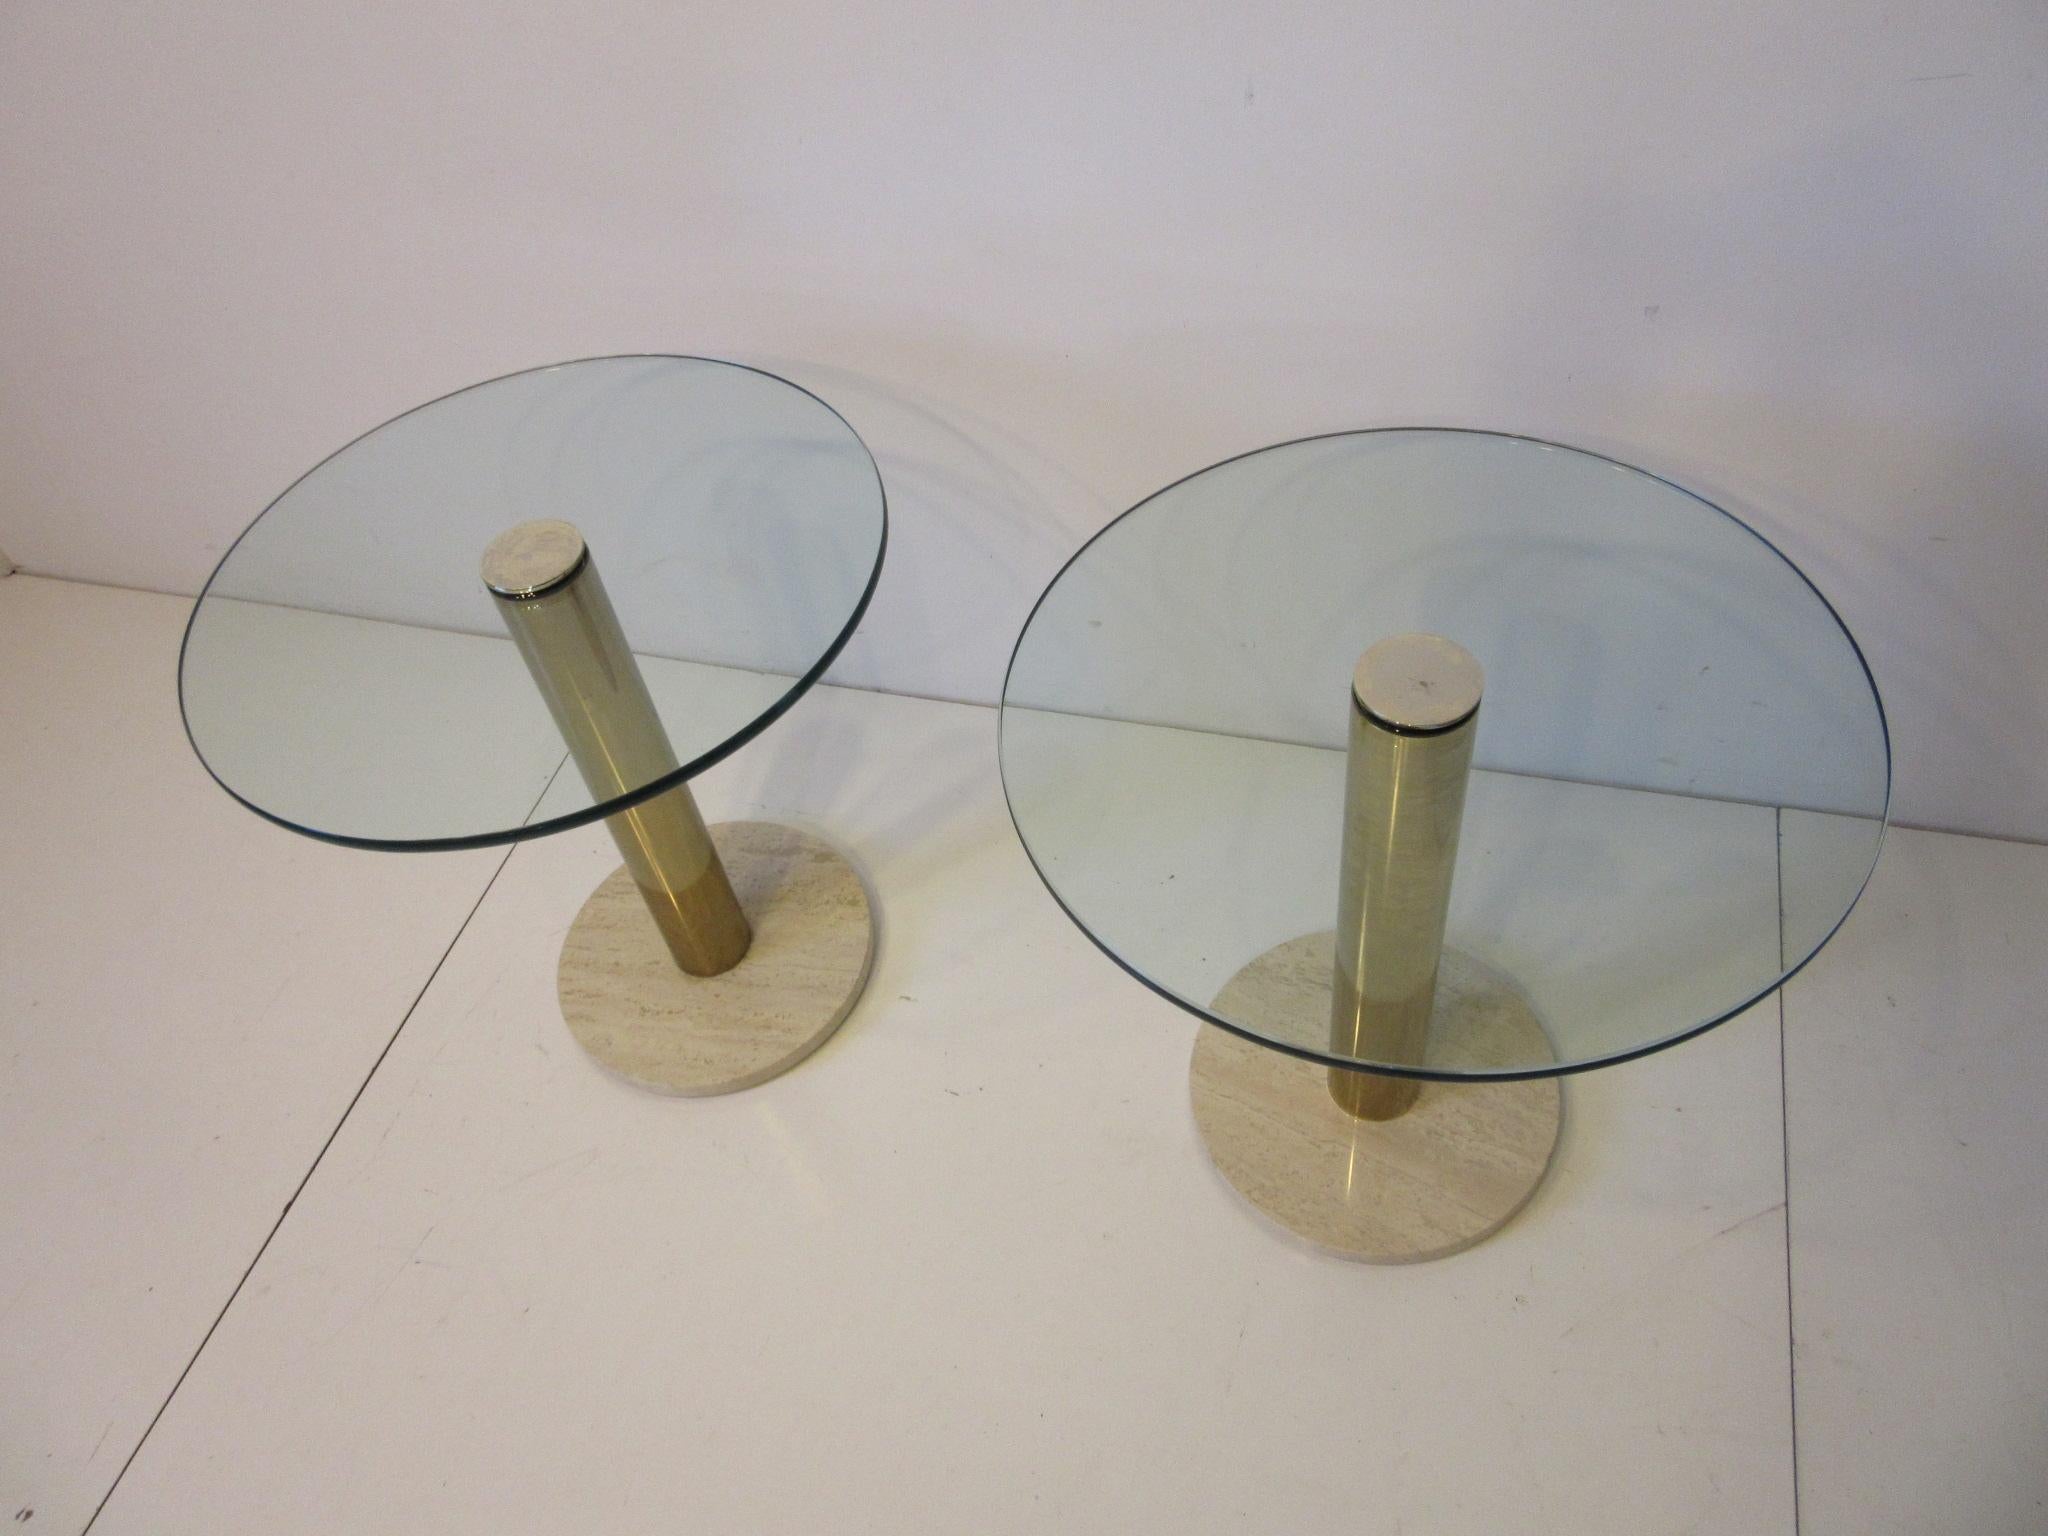 A pair of side tables with glass top having rounded edges, brass base and Italian Travertine marble bottom designed and manufactured by Leon Pace and the Pace Furniture Company. A staple of well designed interiors of the 1970s and 1980s for their